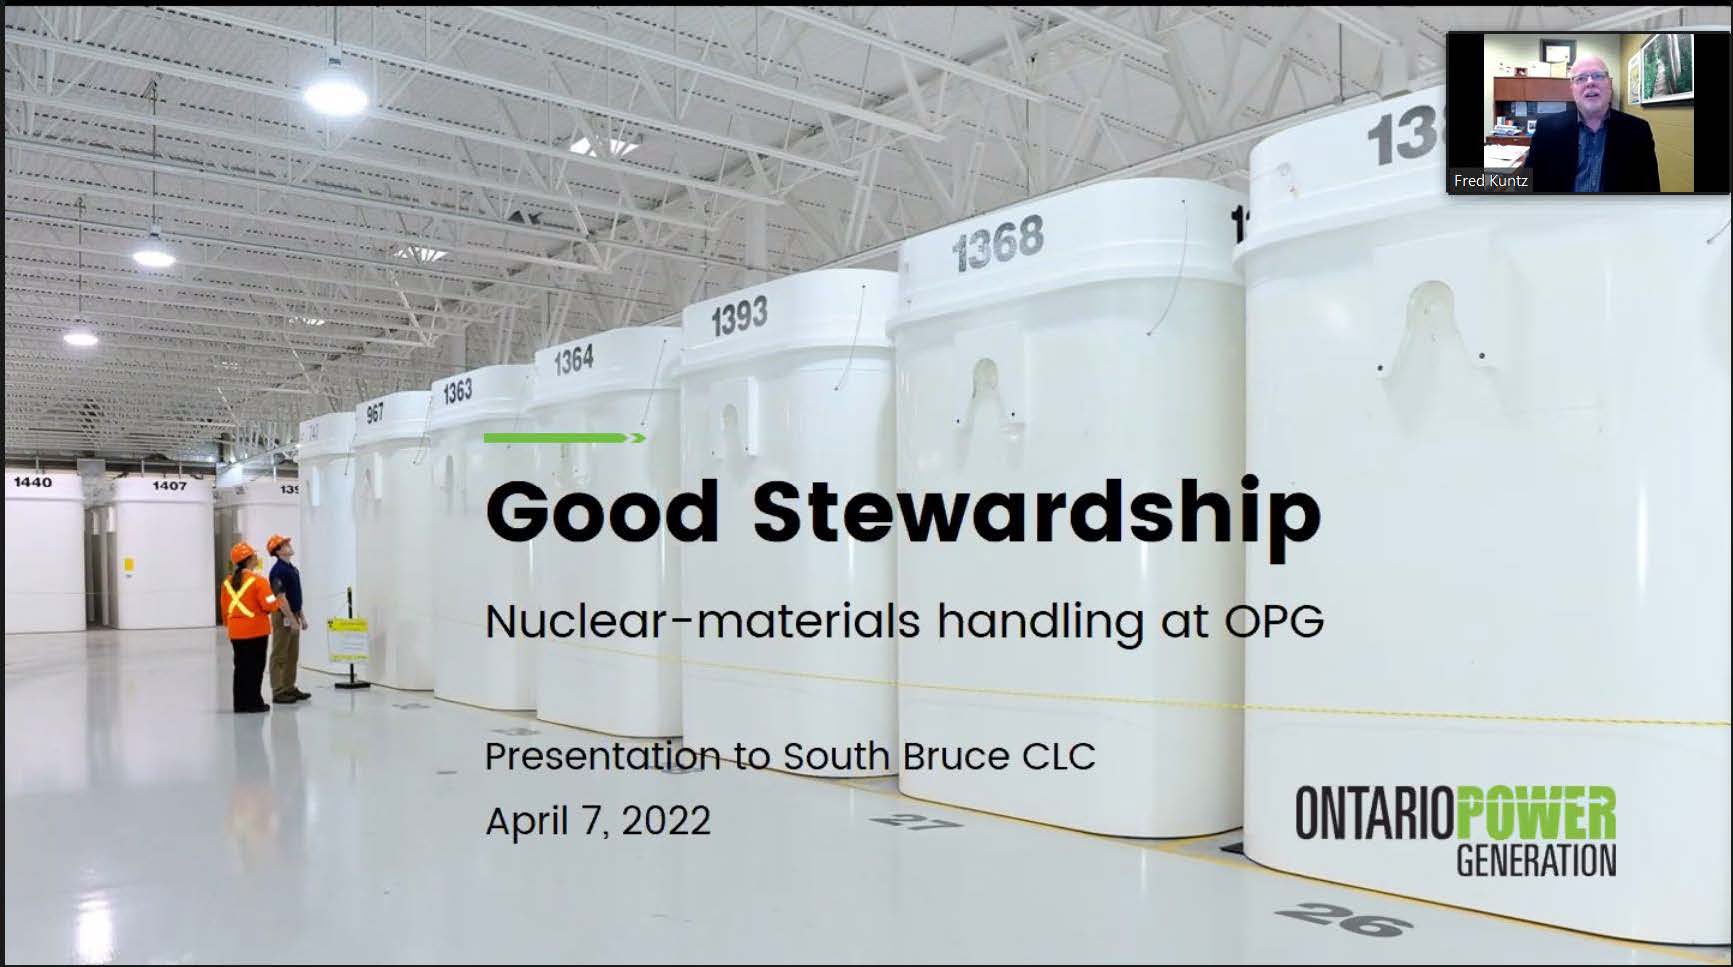 screenshot of slideshow presentation on Good Stewardship with used fuel containers in the background